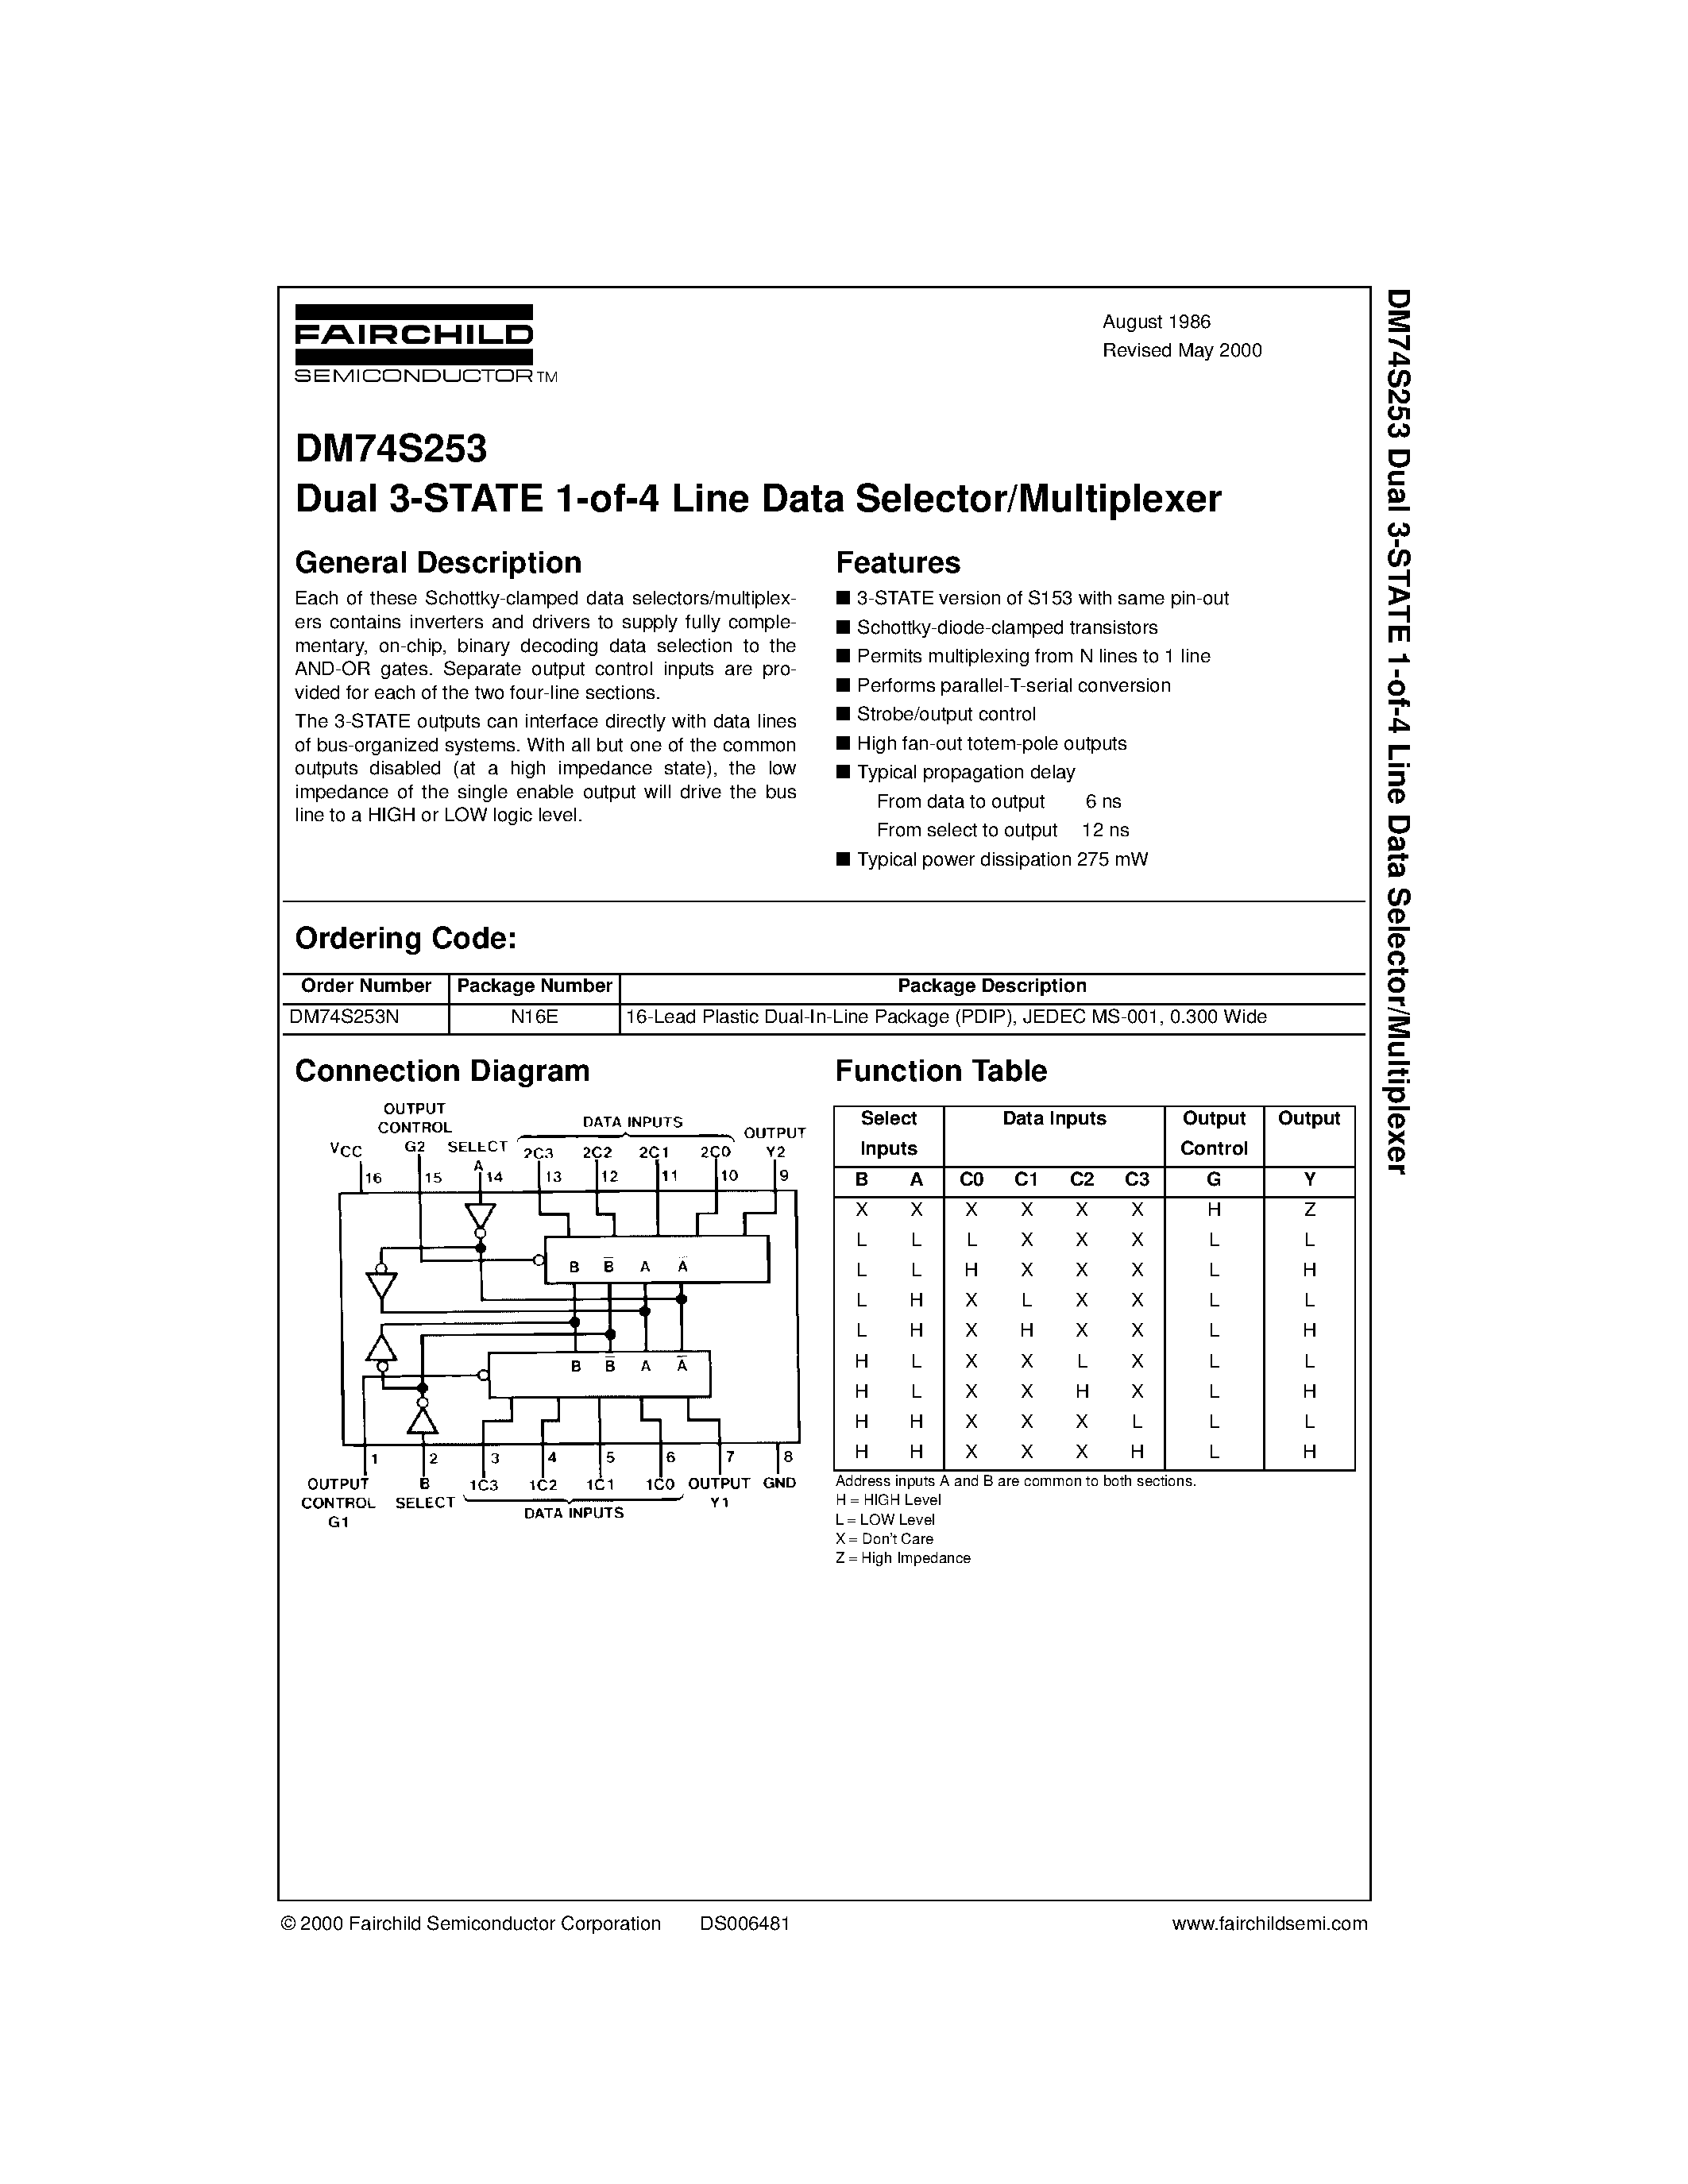 Datasheet DM74S253 - Dual 3-STATE 1-of-4 Line Data Selector/Multiplexer page 1